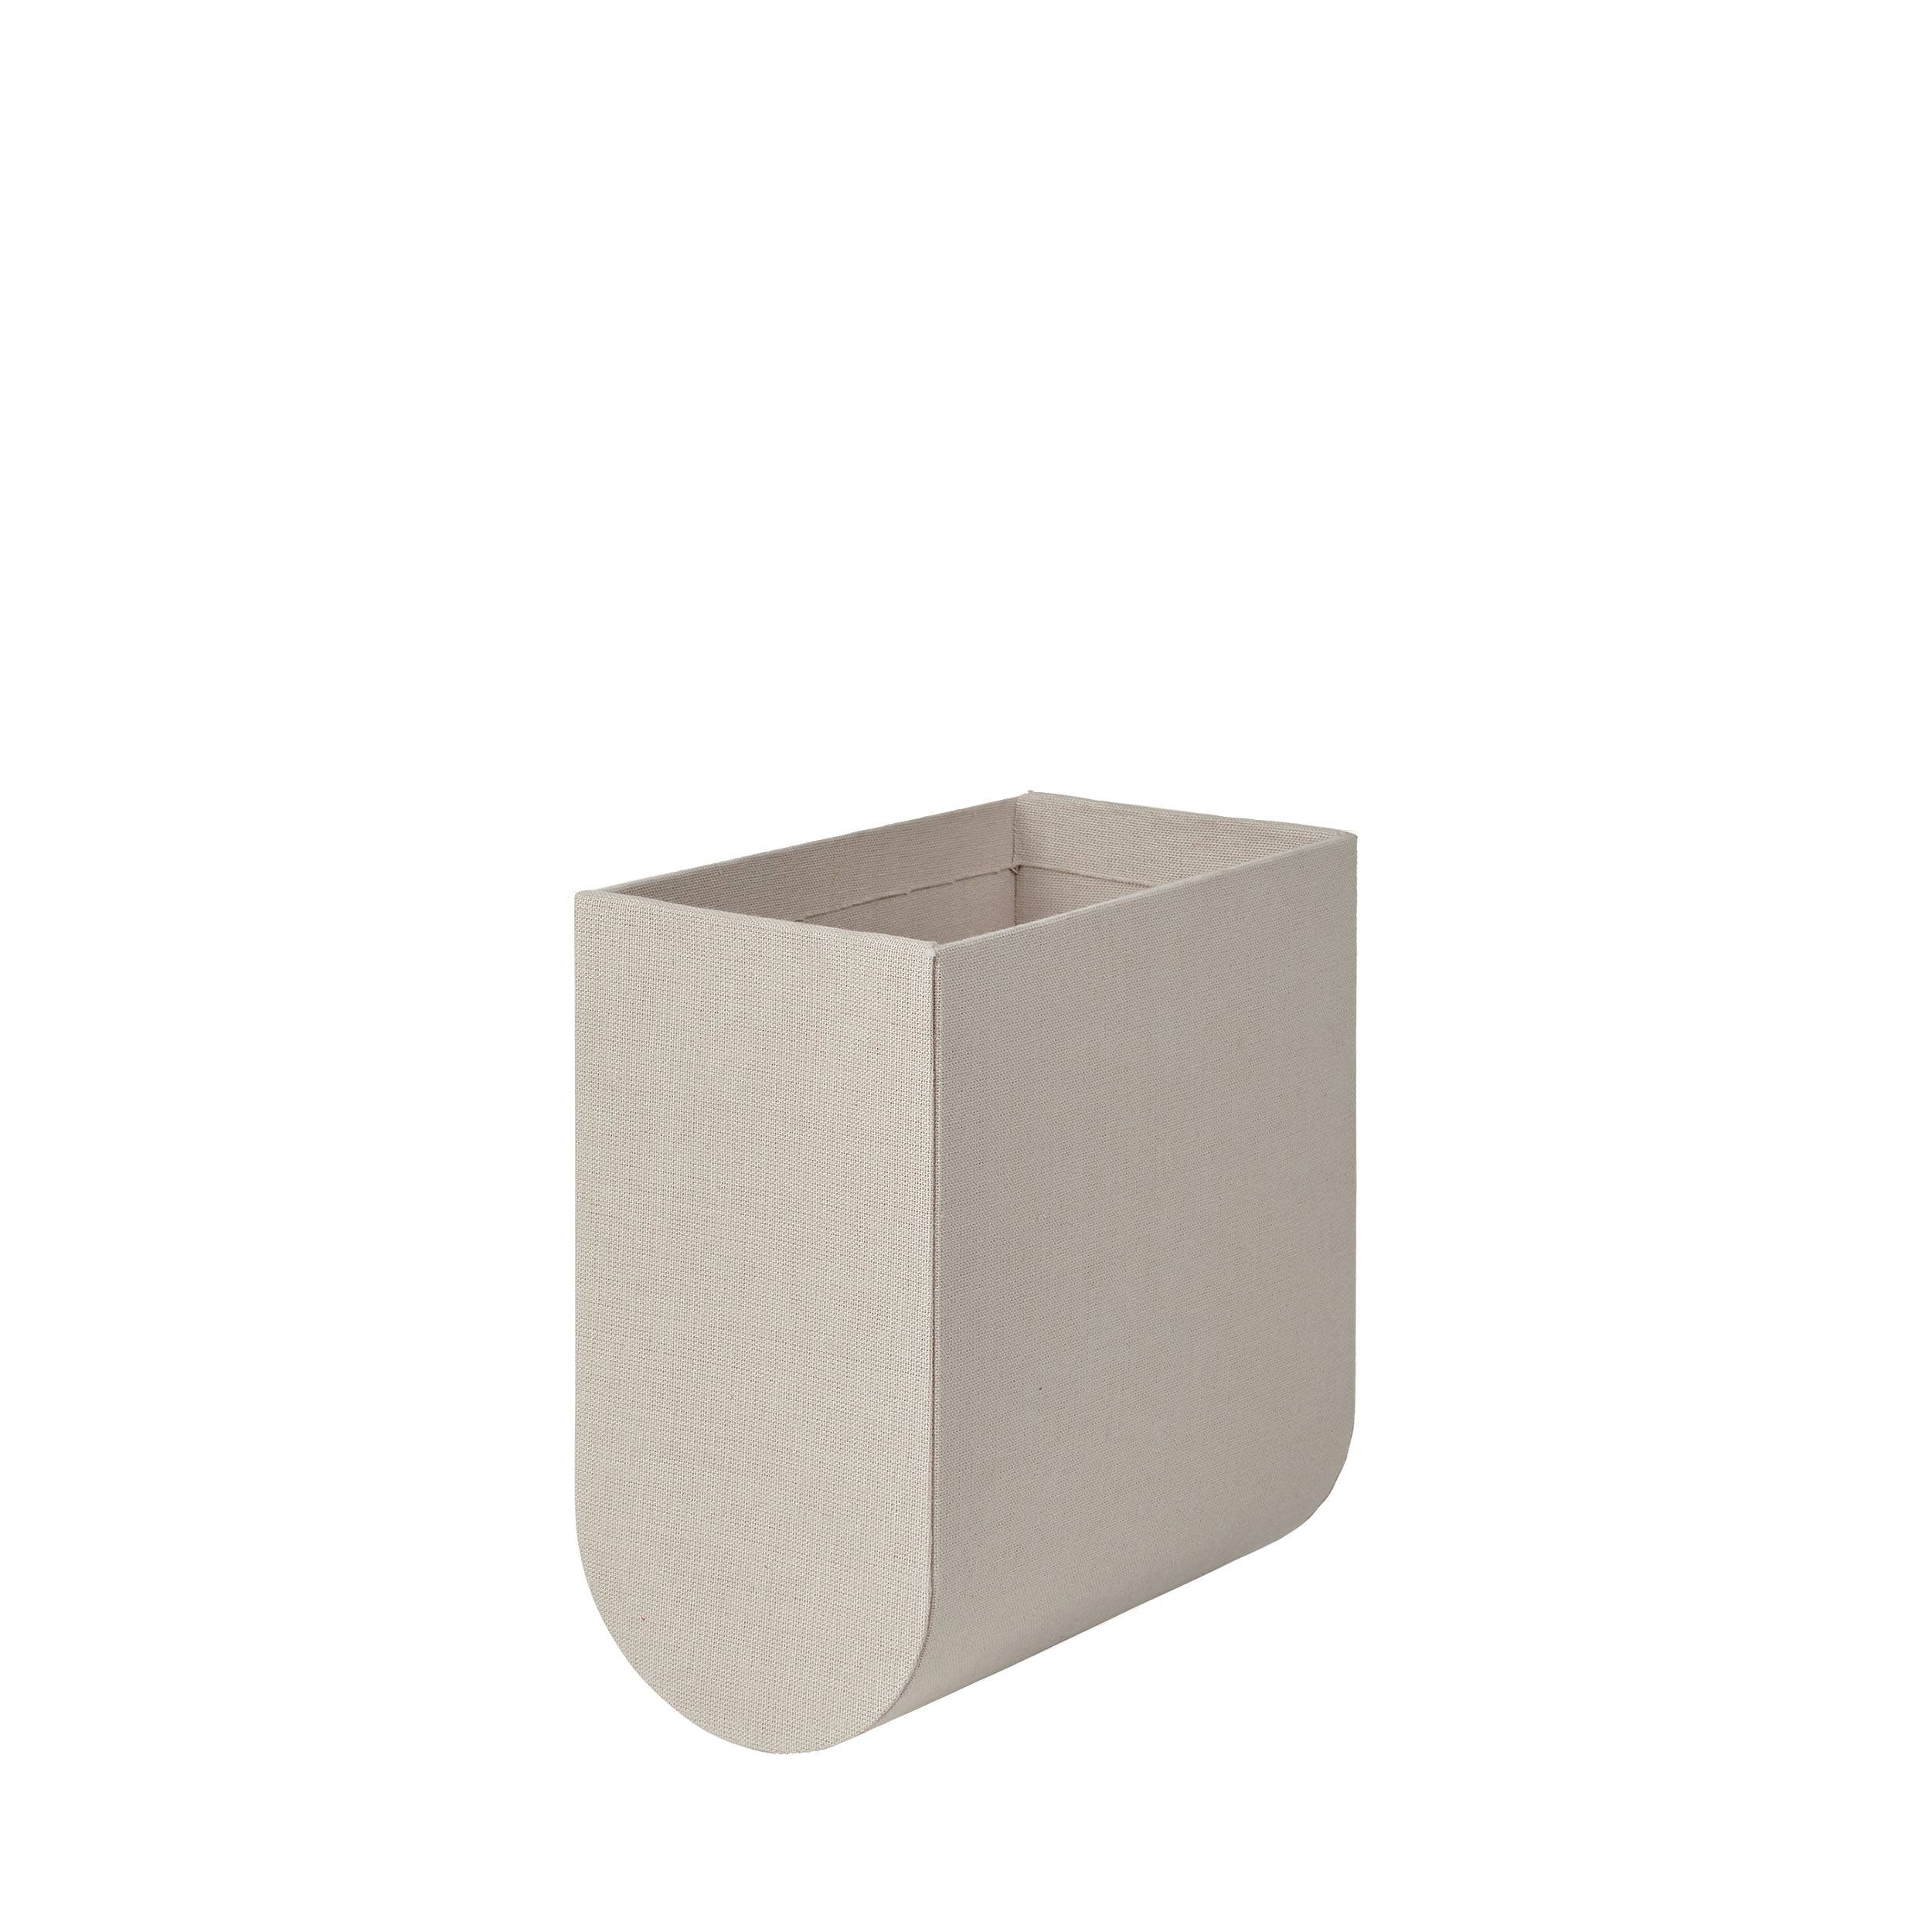 Curved Wall Box